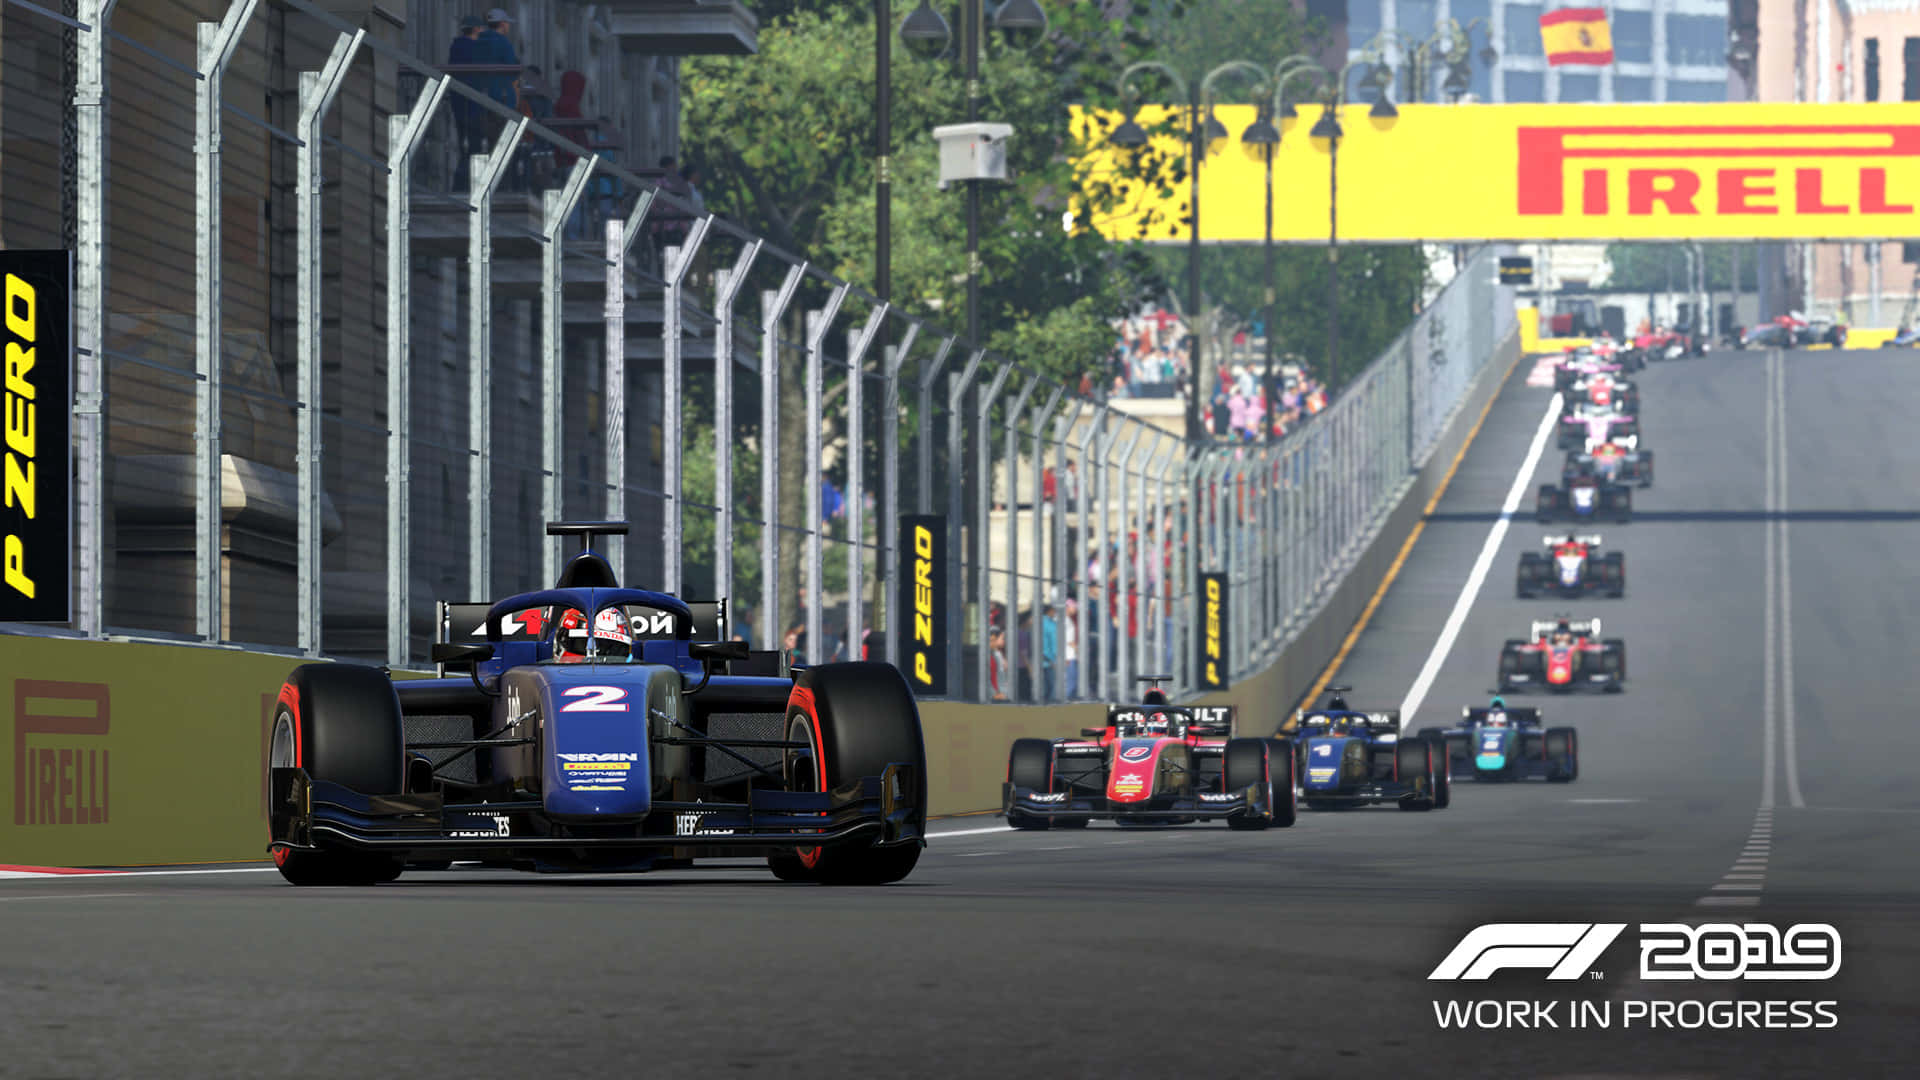 Experience the thrill of the 2019 F1 Season with the HD F1 2019 Background